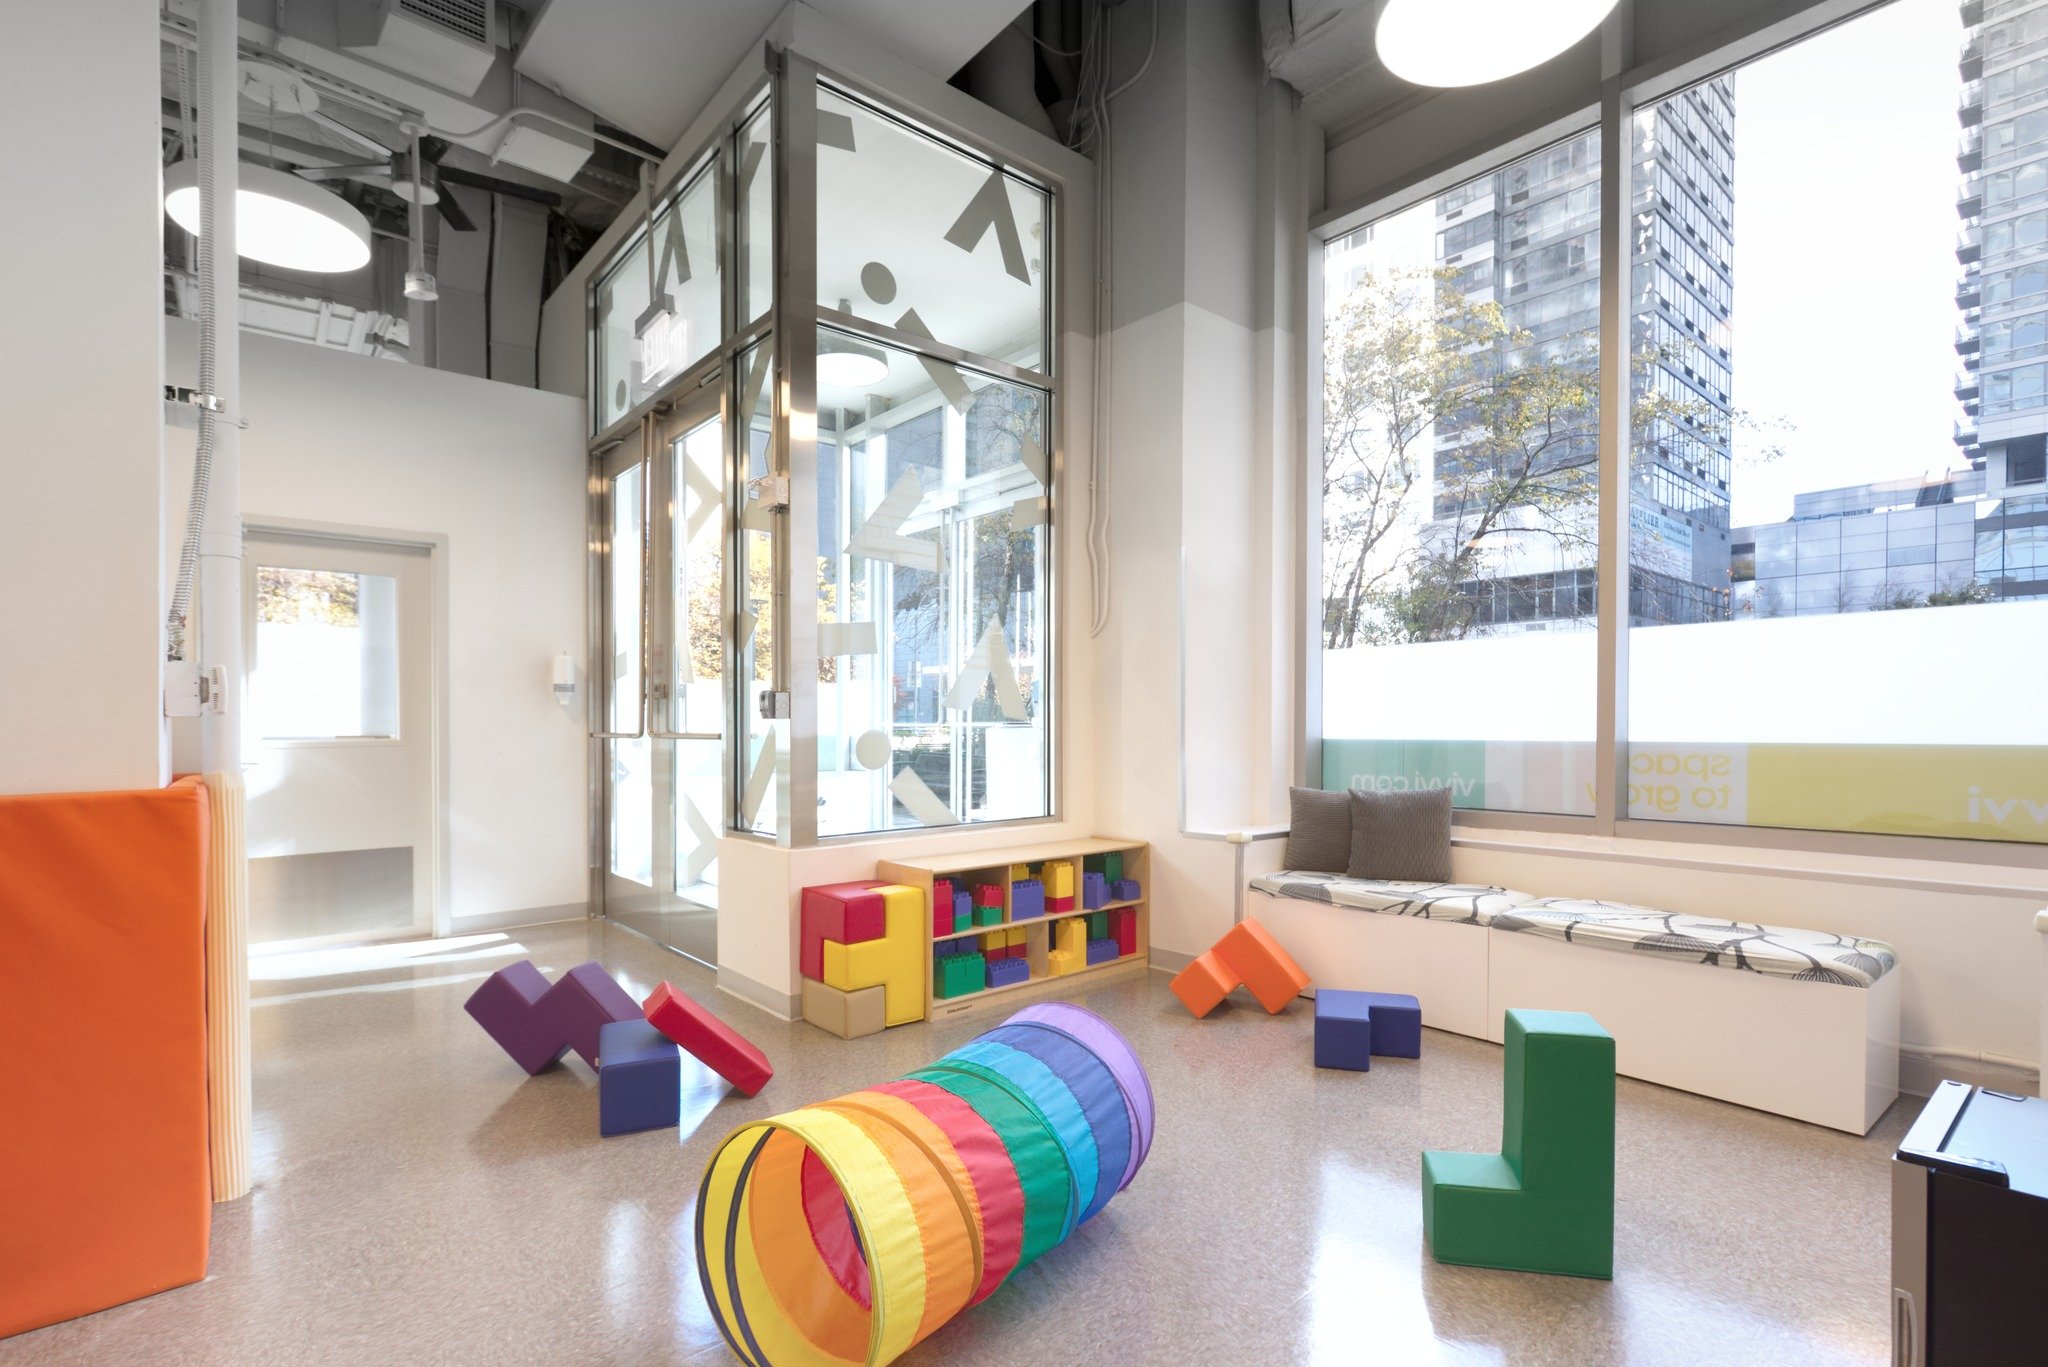 Time for school! At Vivvi Midtown West, we used our design know-how to make the most of the school&rsquo;s limited footprint. We programmed the entry space to allow children to exercise indoors. At times other than pickup and drop-off, the children e